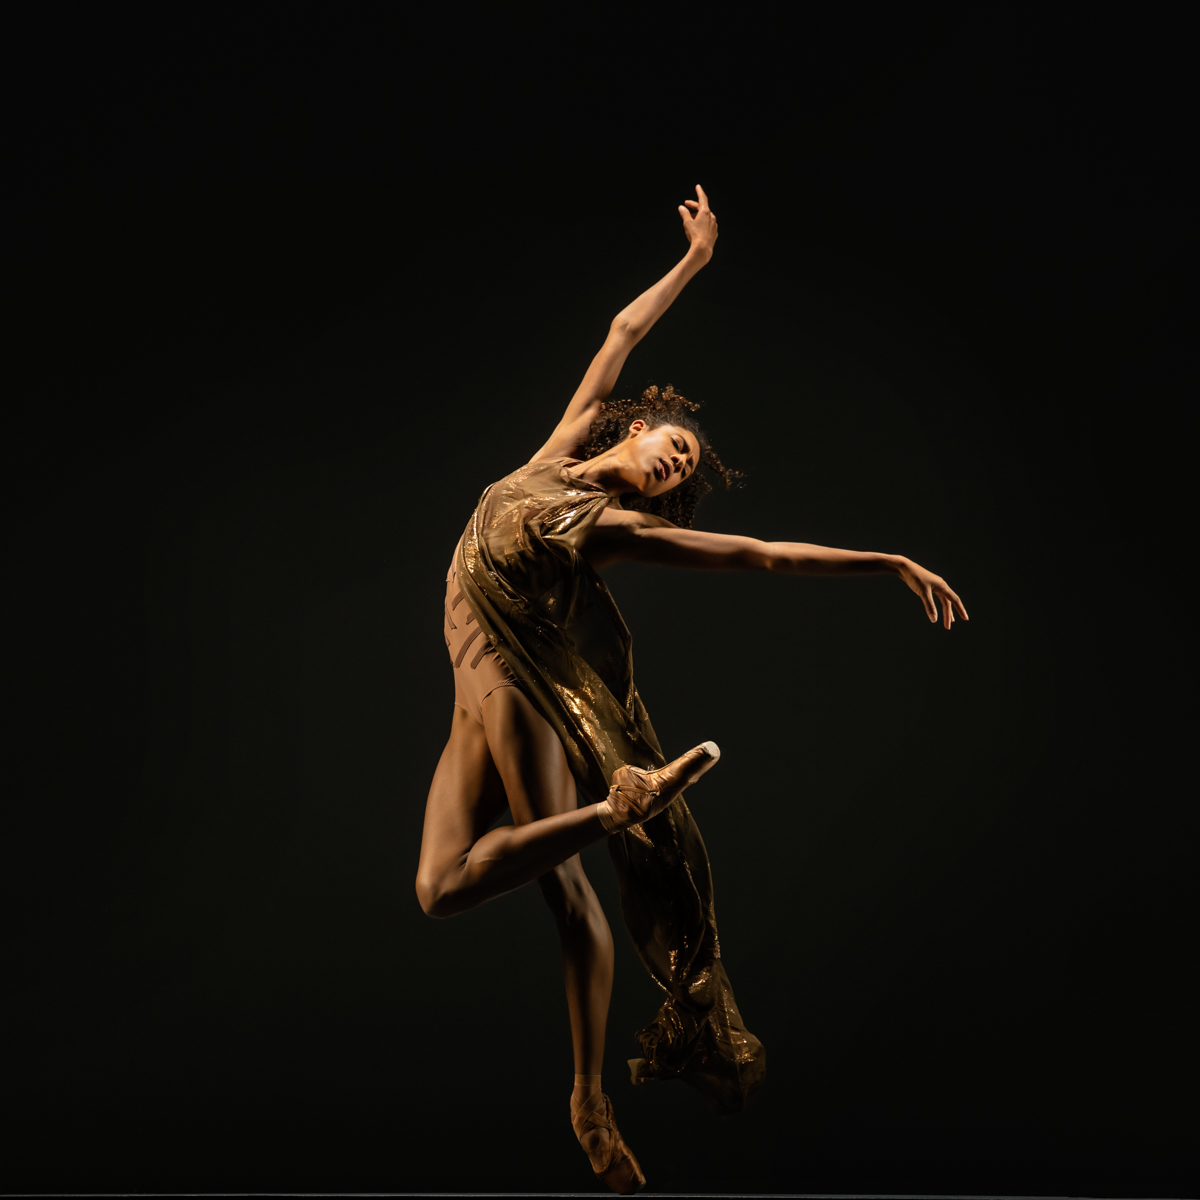 LINES Ballet company artist Adji Cissoko en pointe leaning over the edge of one pointe shoe with the other leg bent at the knee and tucked across the front of the standing leg. Arms are sweeping, one up above the body, the other out to the side.